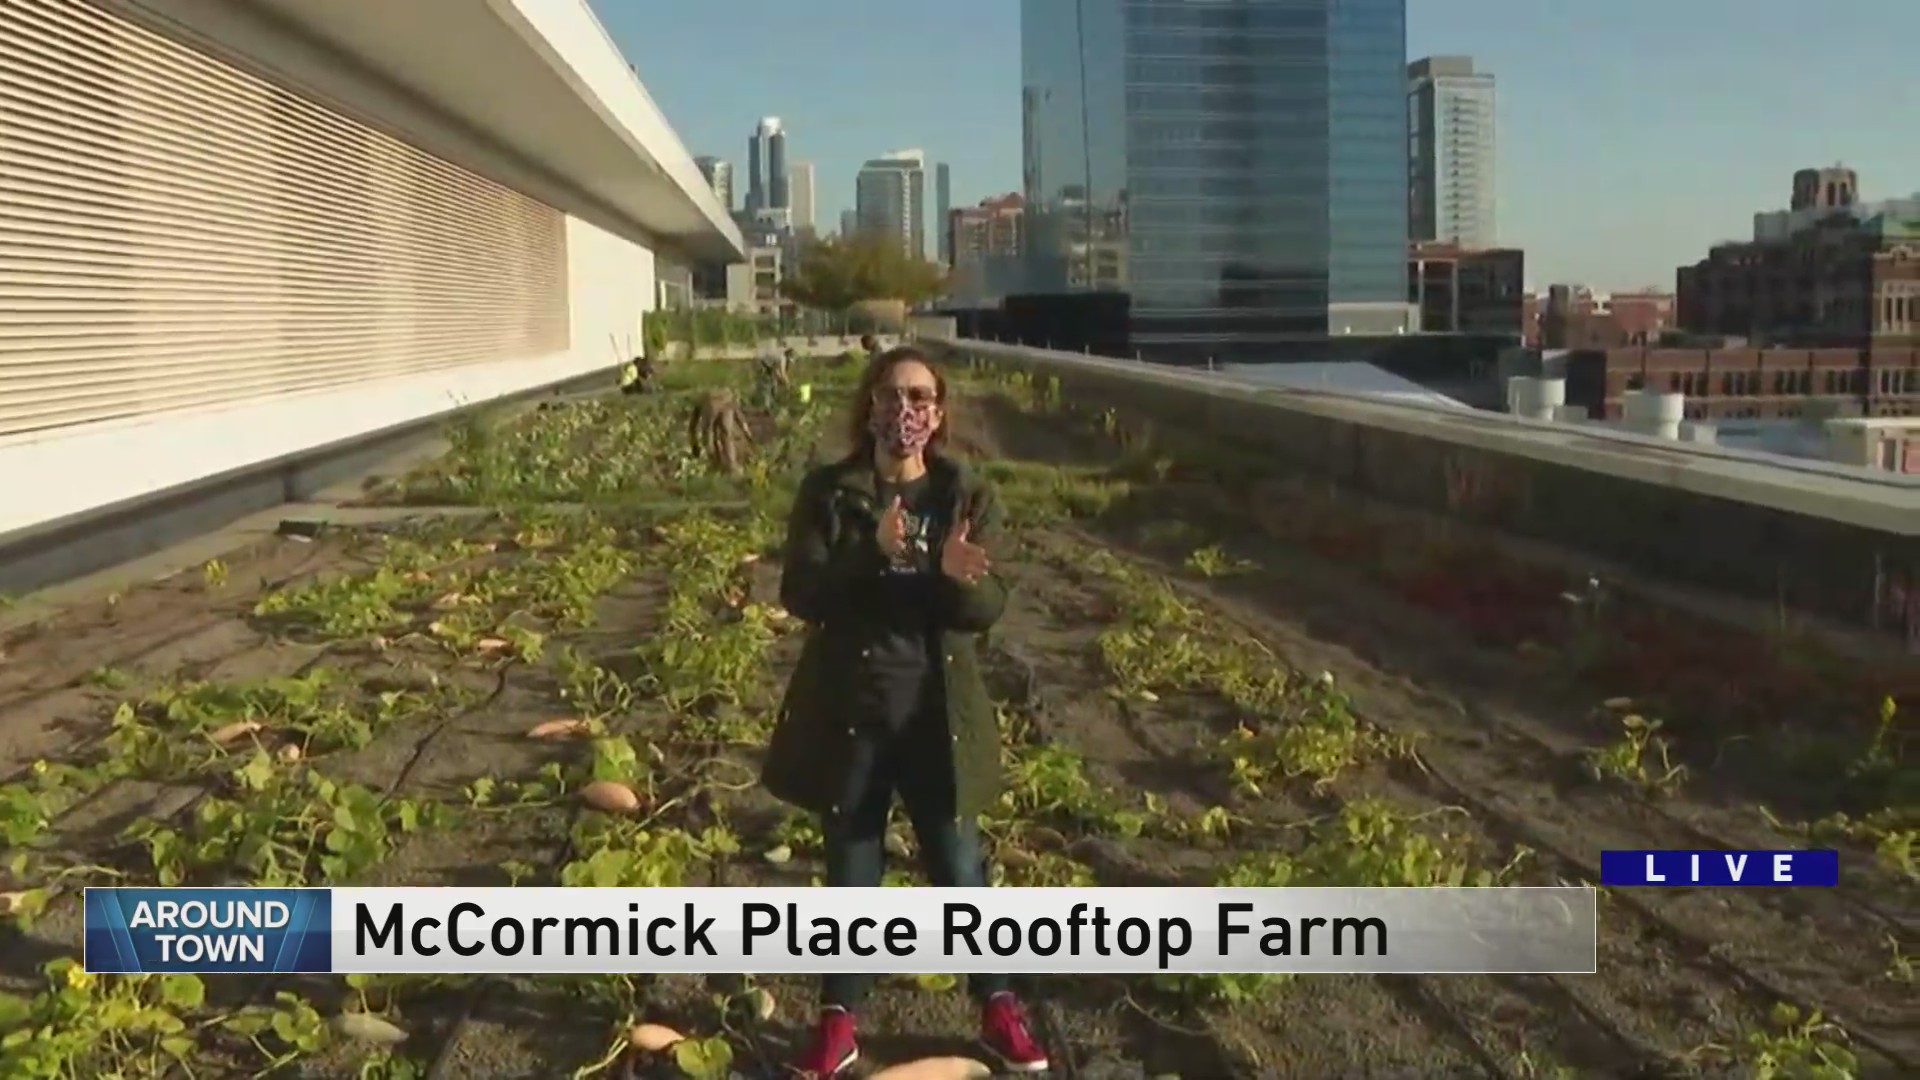 Around Town checks out the rooftop farm at the McCormick Place